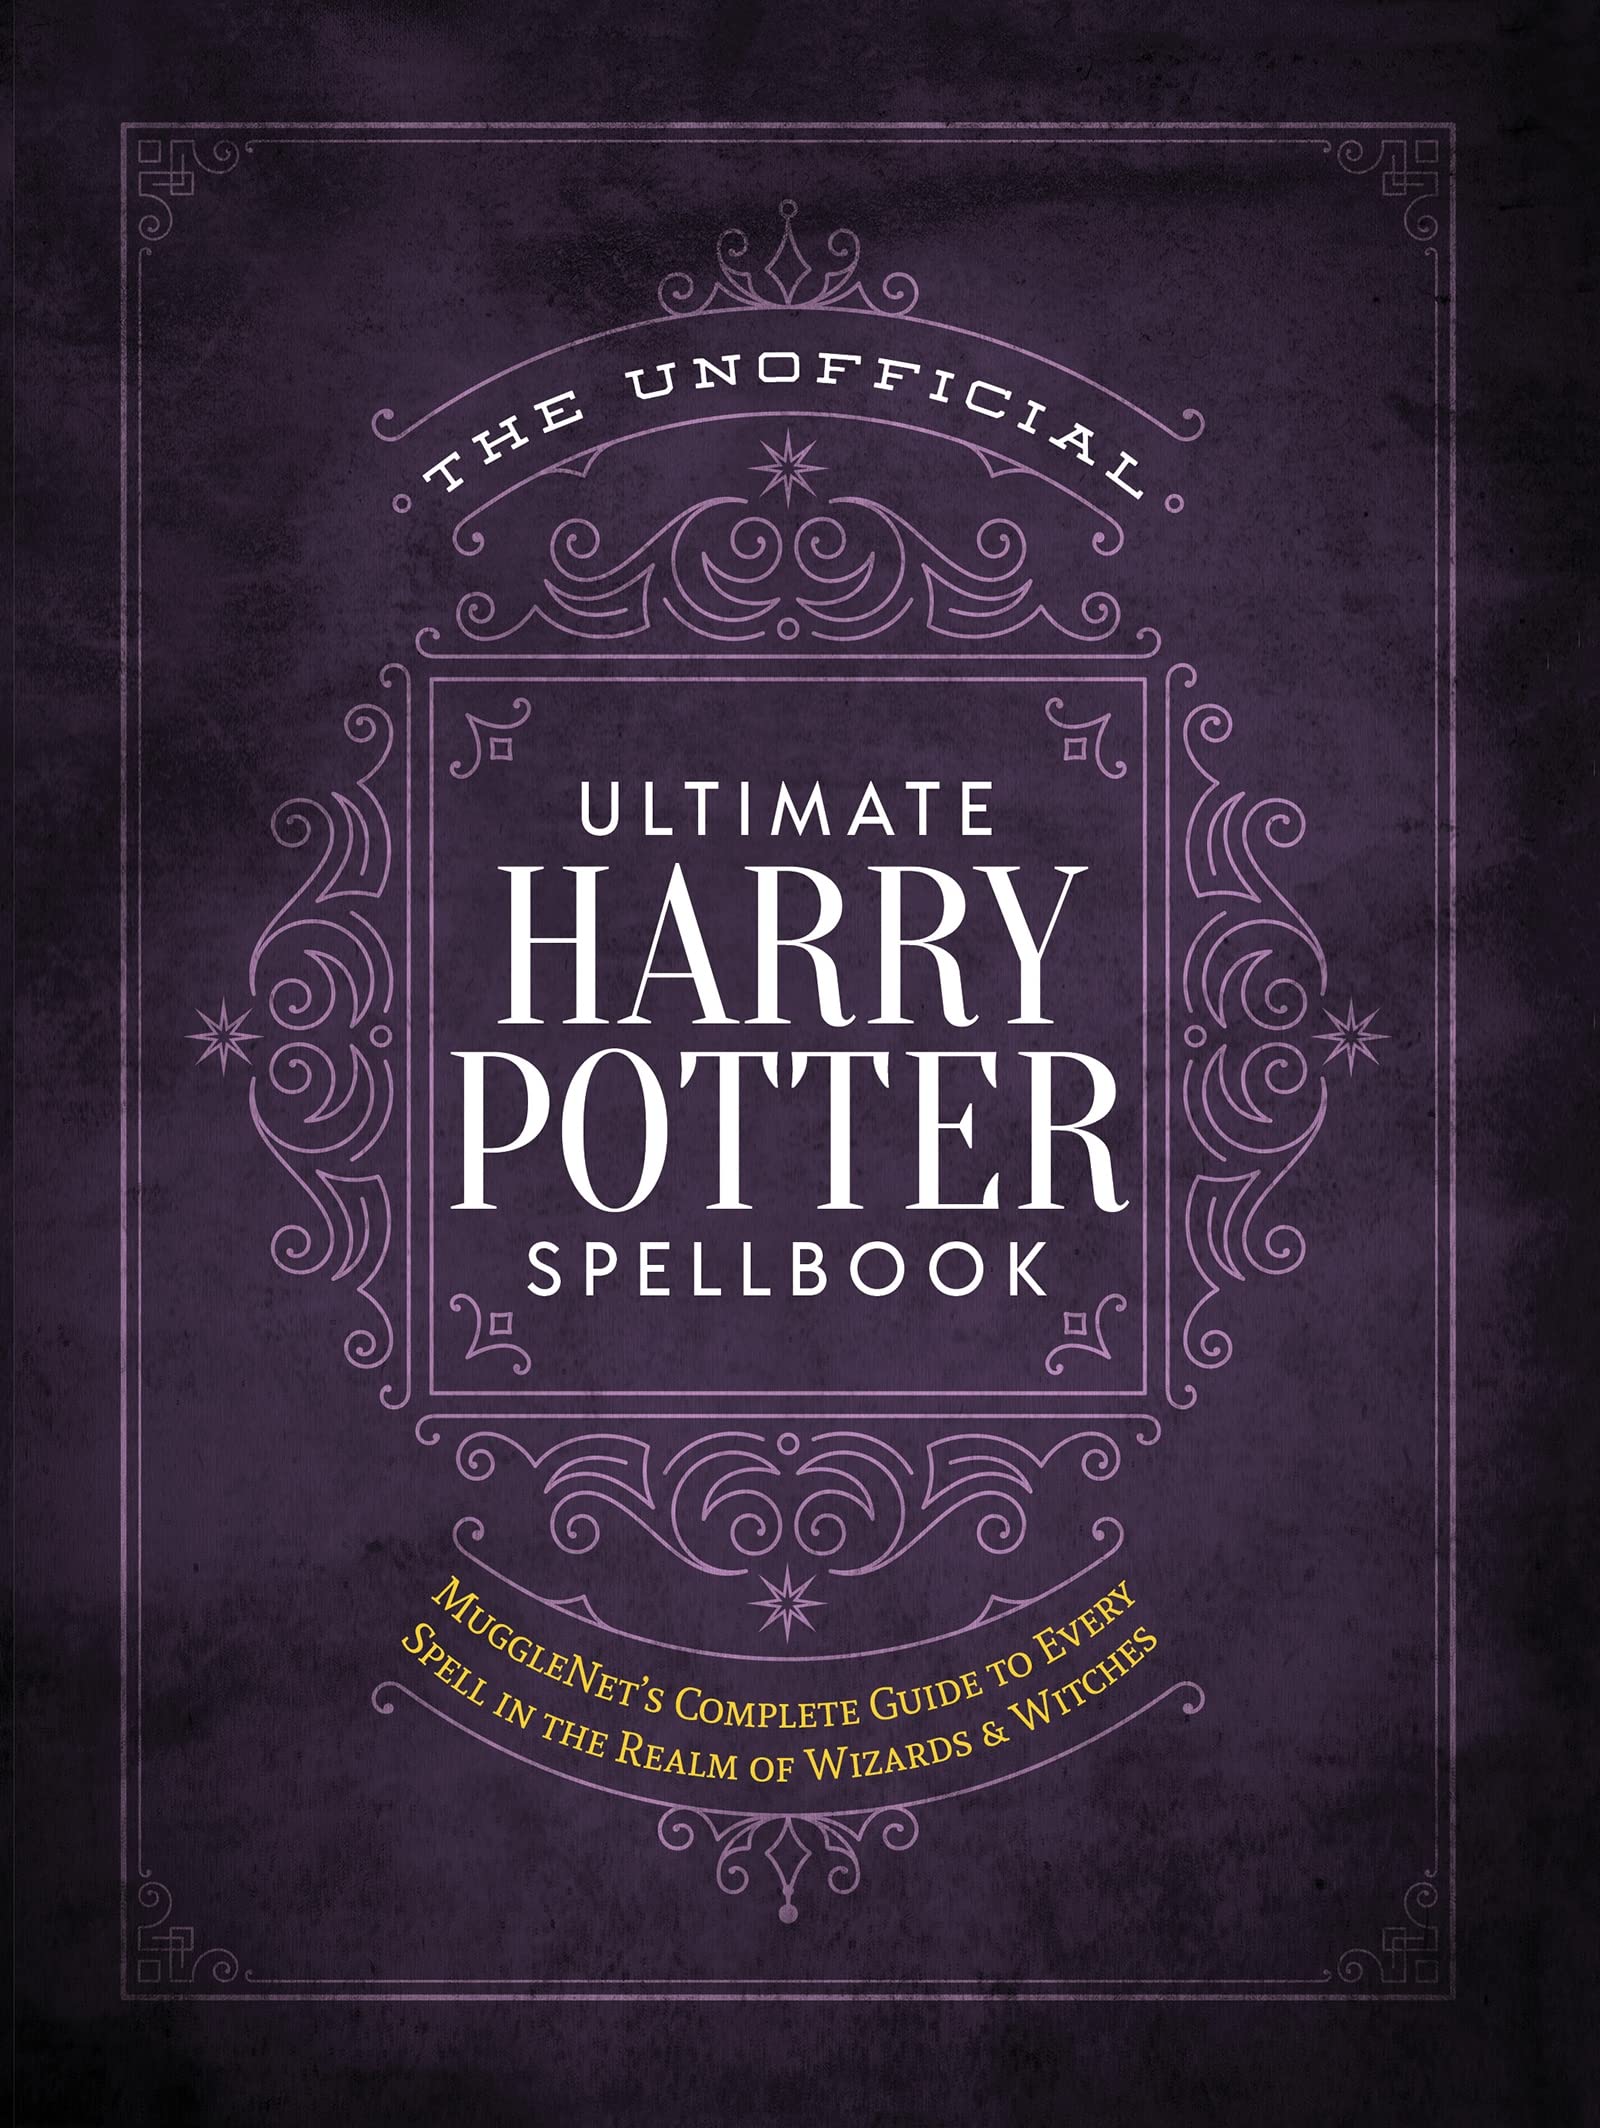 The Unofficial Ultimate Harry Potter Spellbook: A Complete Reference Guide to Every Spell in the Realm of Wizards and Witches by The Editors of Mugglenet